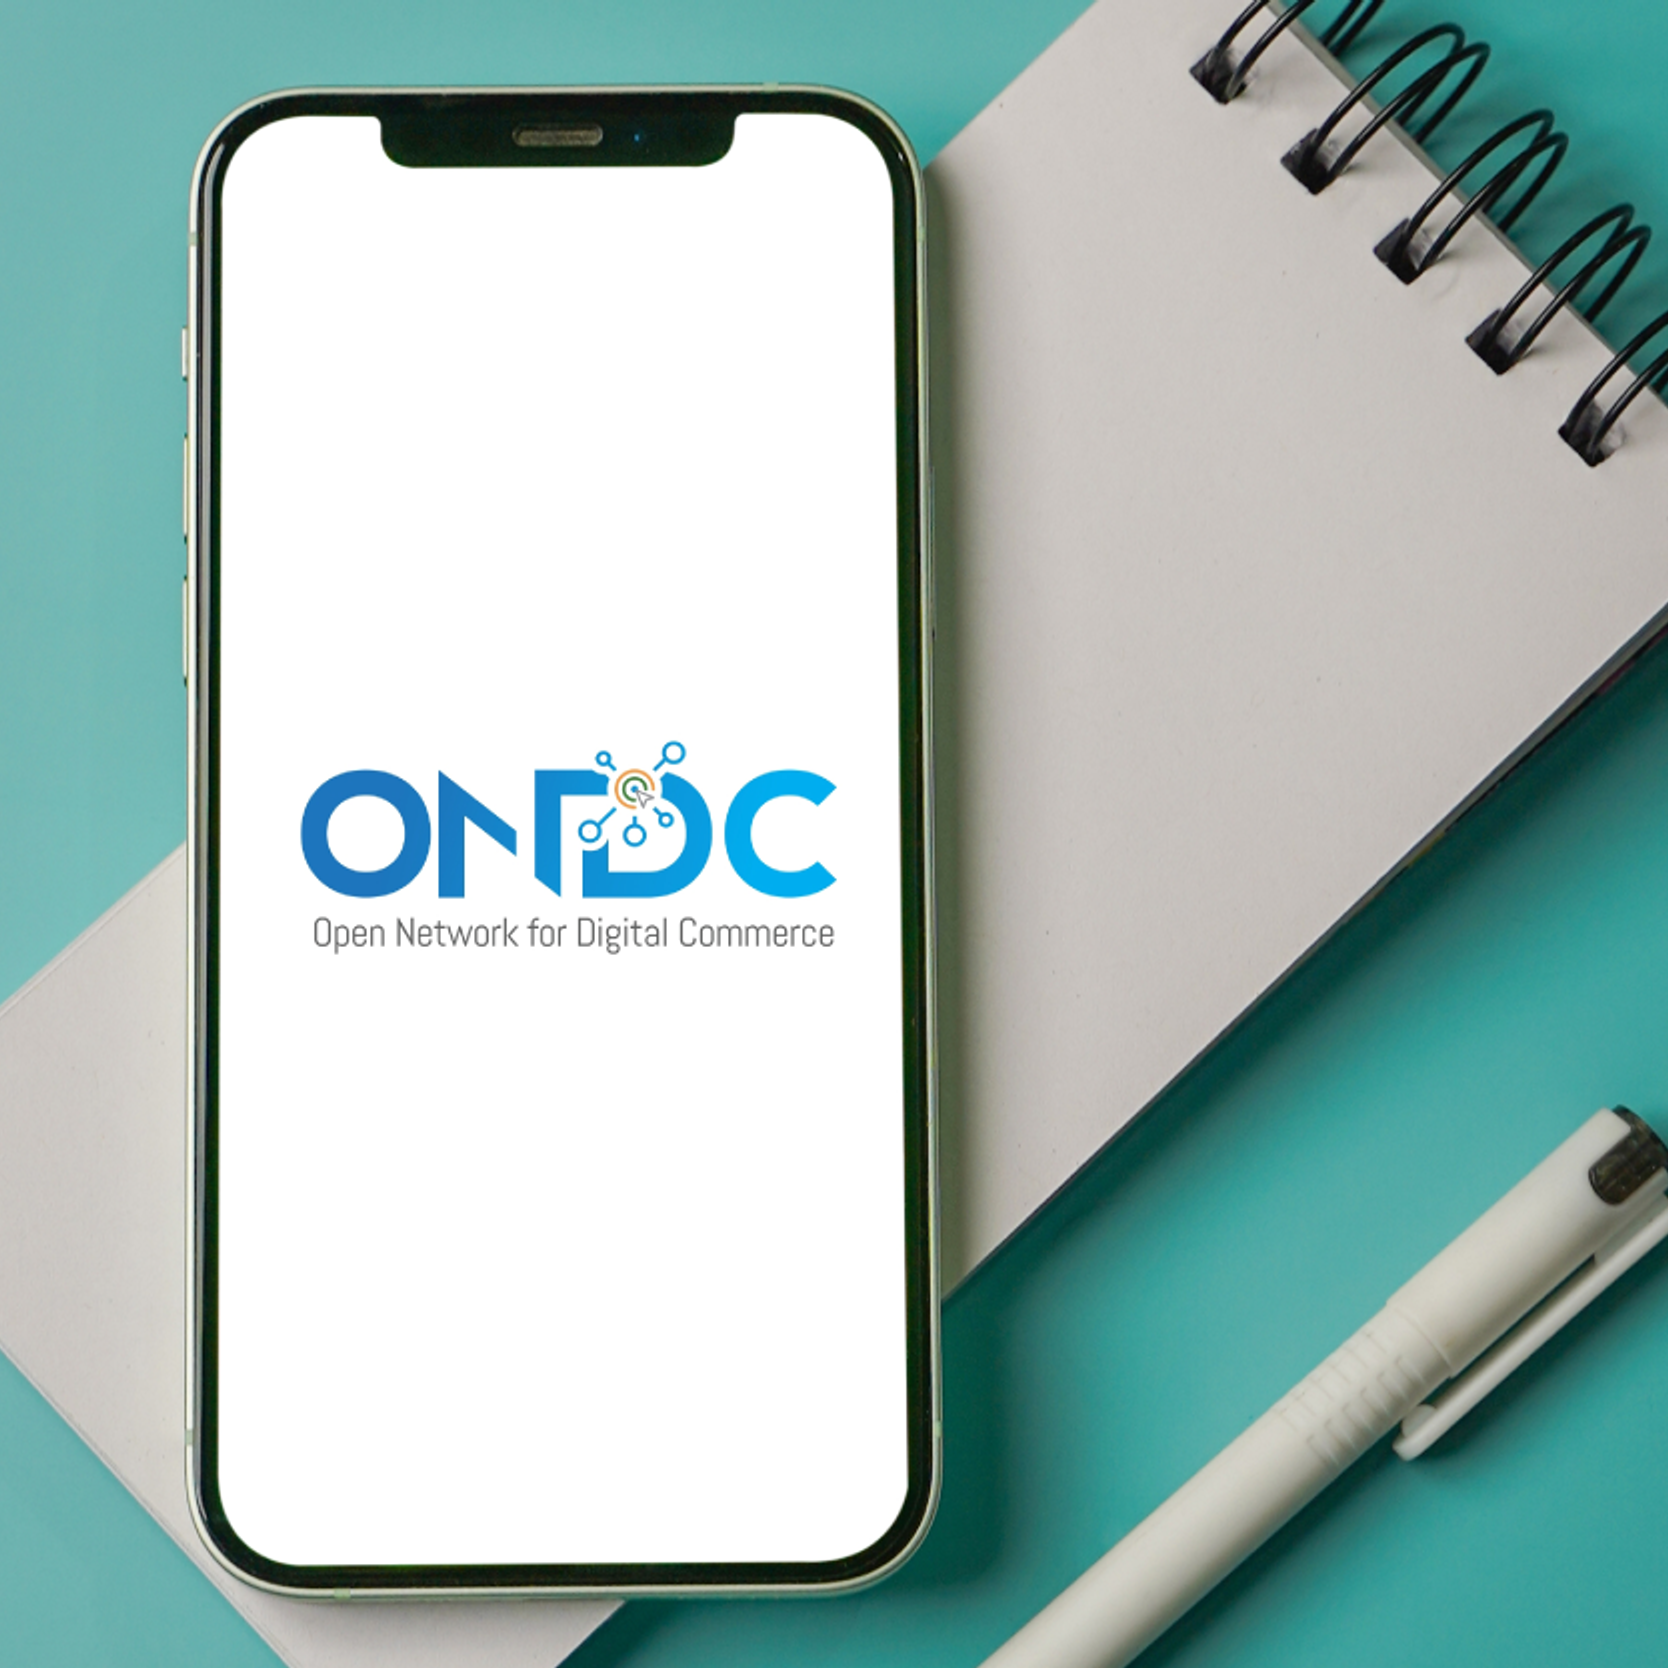 Monthly transactions on ONDC to hit around 50 million by the end of the year: CEO Koshy
